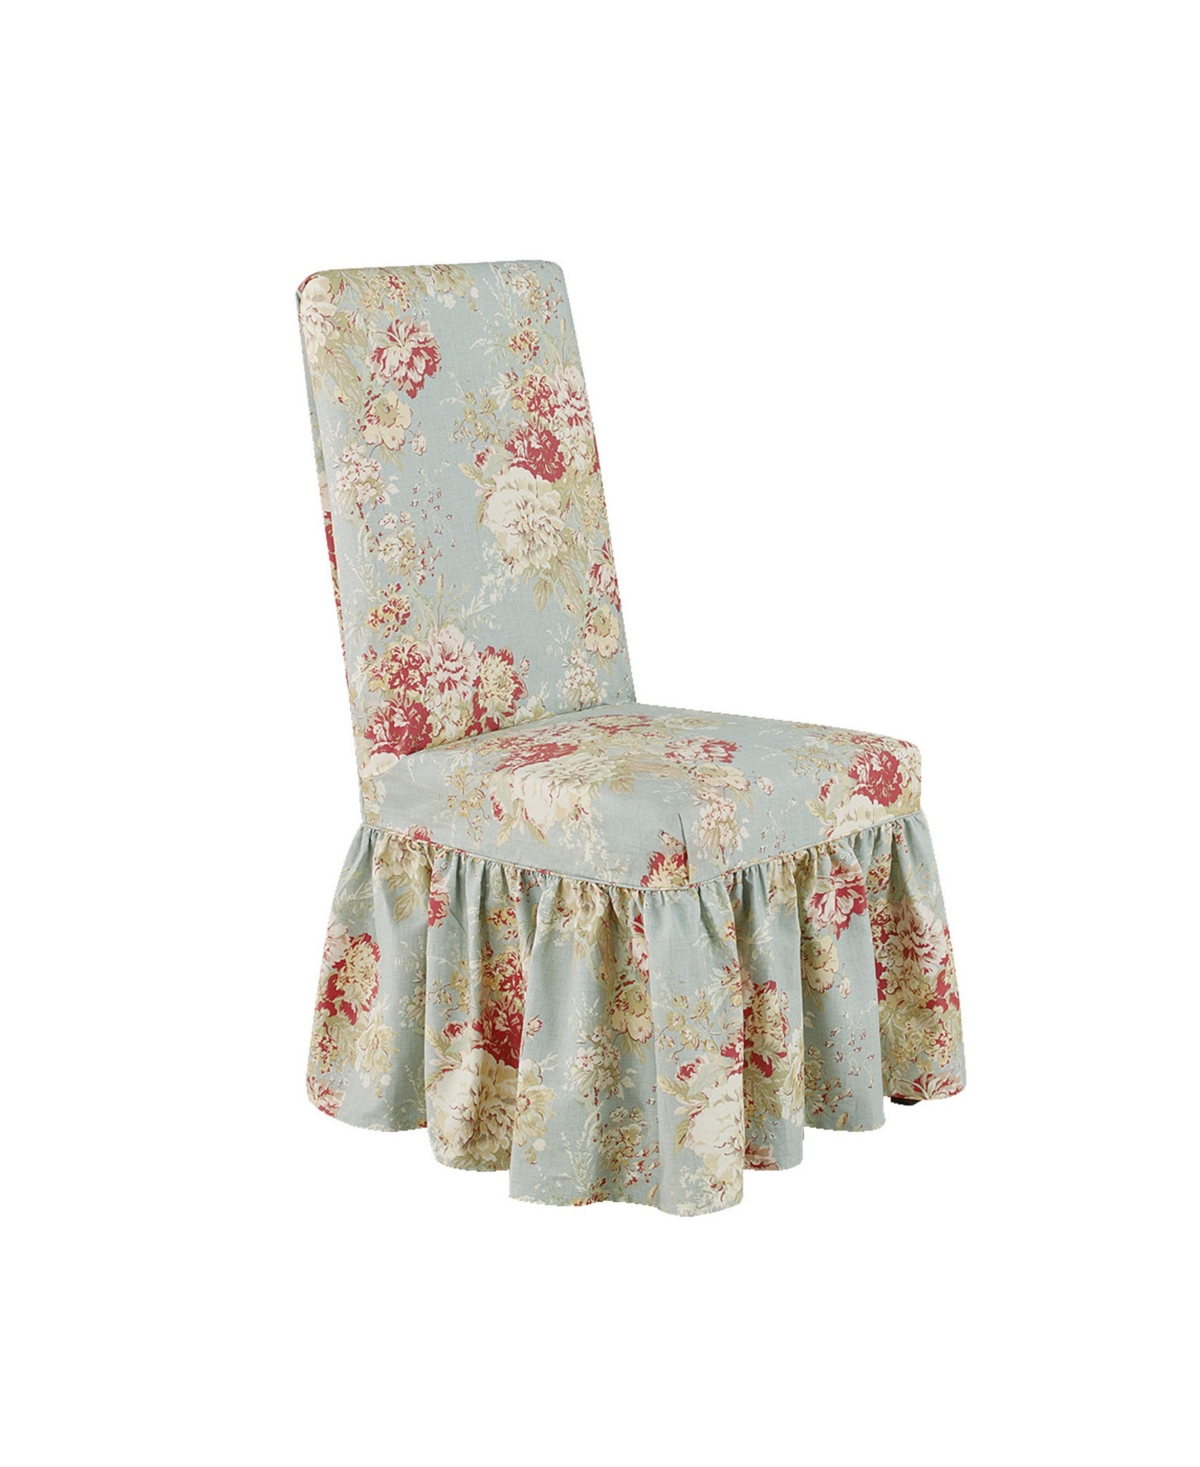 Waverly Ballad Bouquet Long Dining Chair Slipcover, 42" X 19" In Robin's Egg